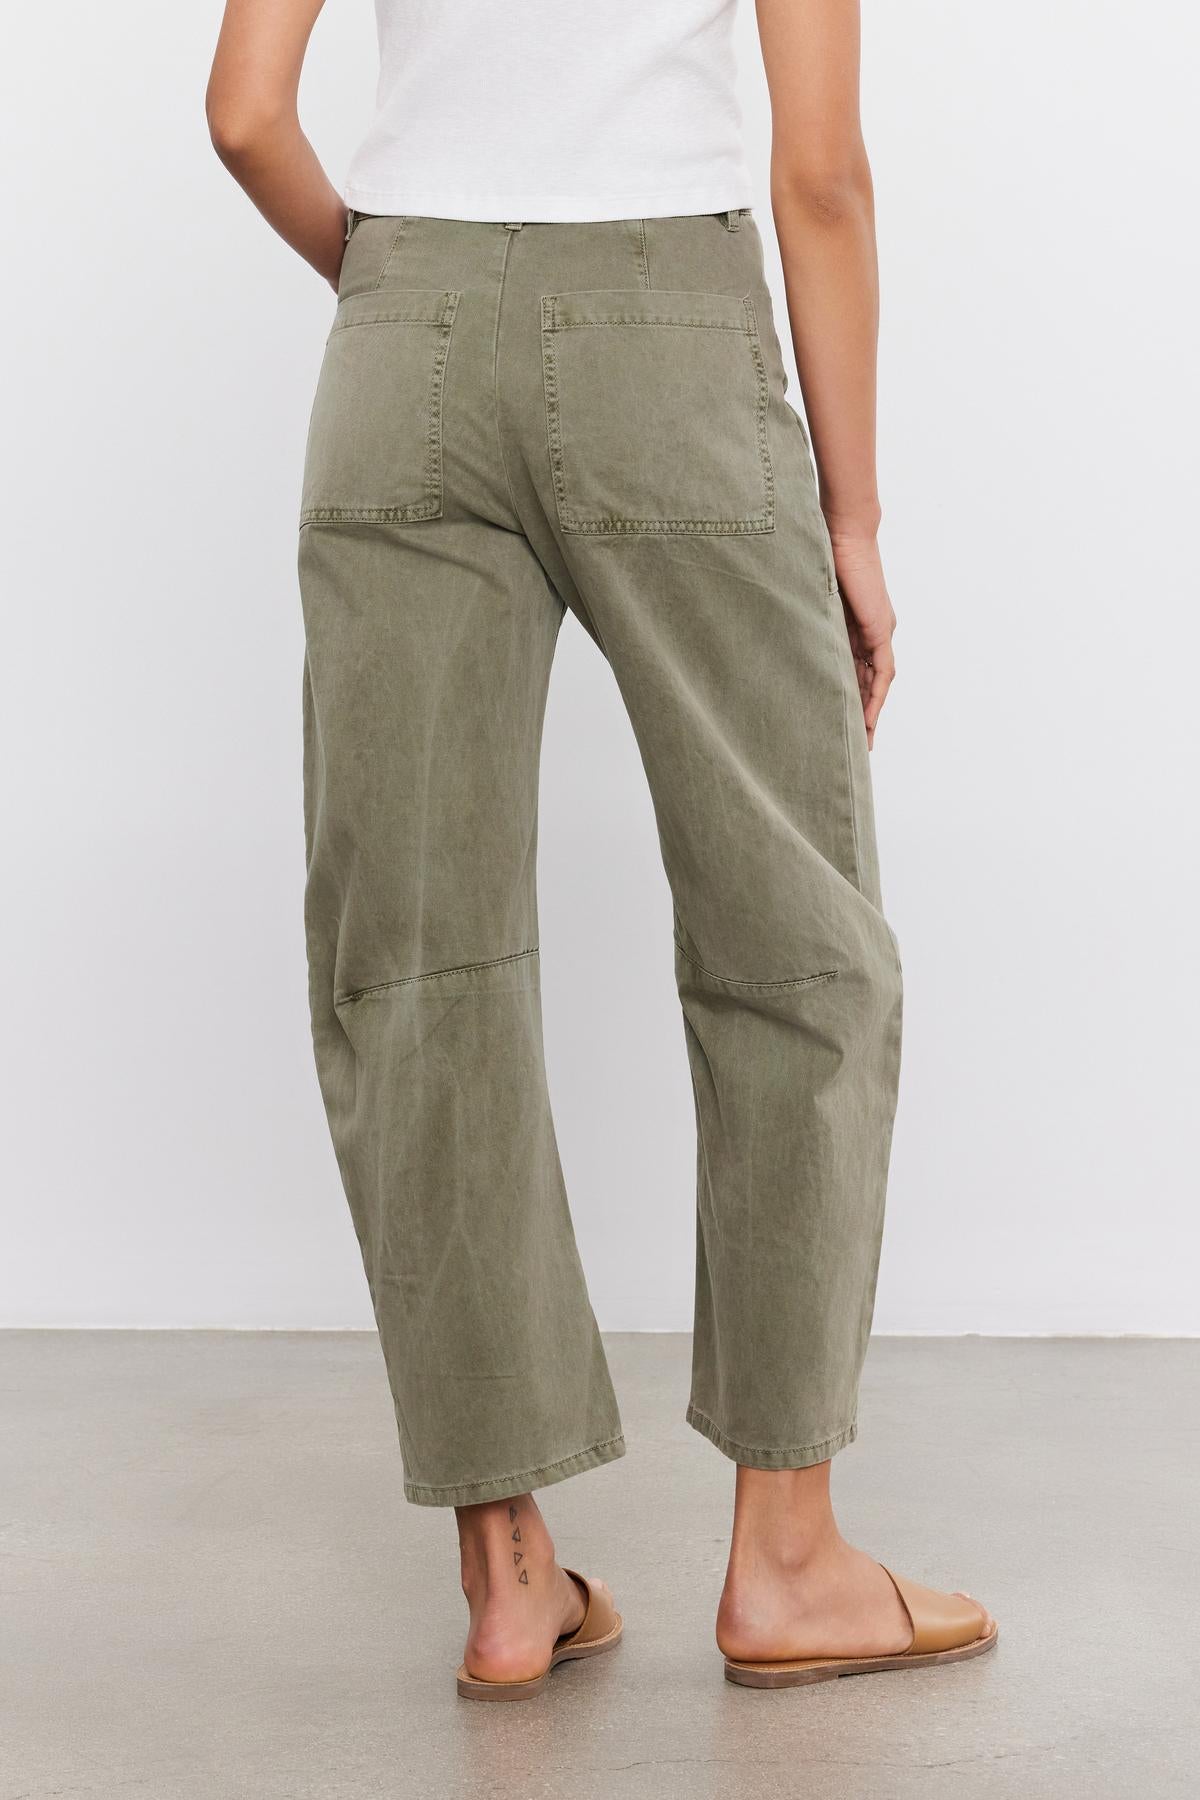 Rear view of a person wearing Velvet by Graham & Spencer BRYLIE SANDED TWILL UTILITY PANT trousers and a white t-shirt, standing on a grey floor with brown shoes.-37000518140097